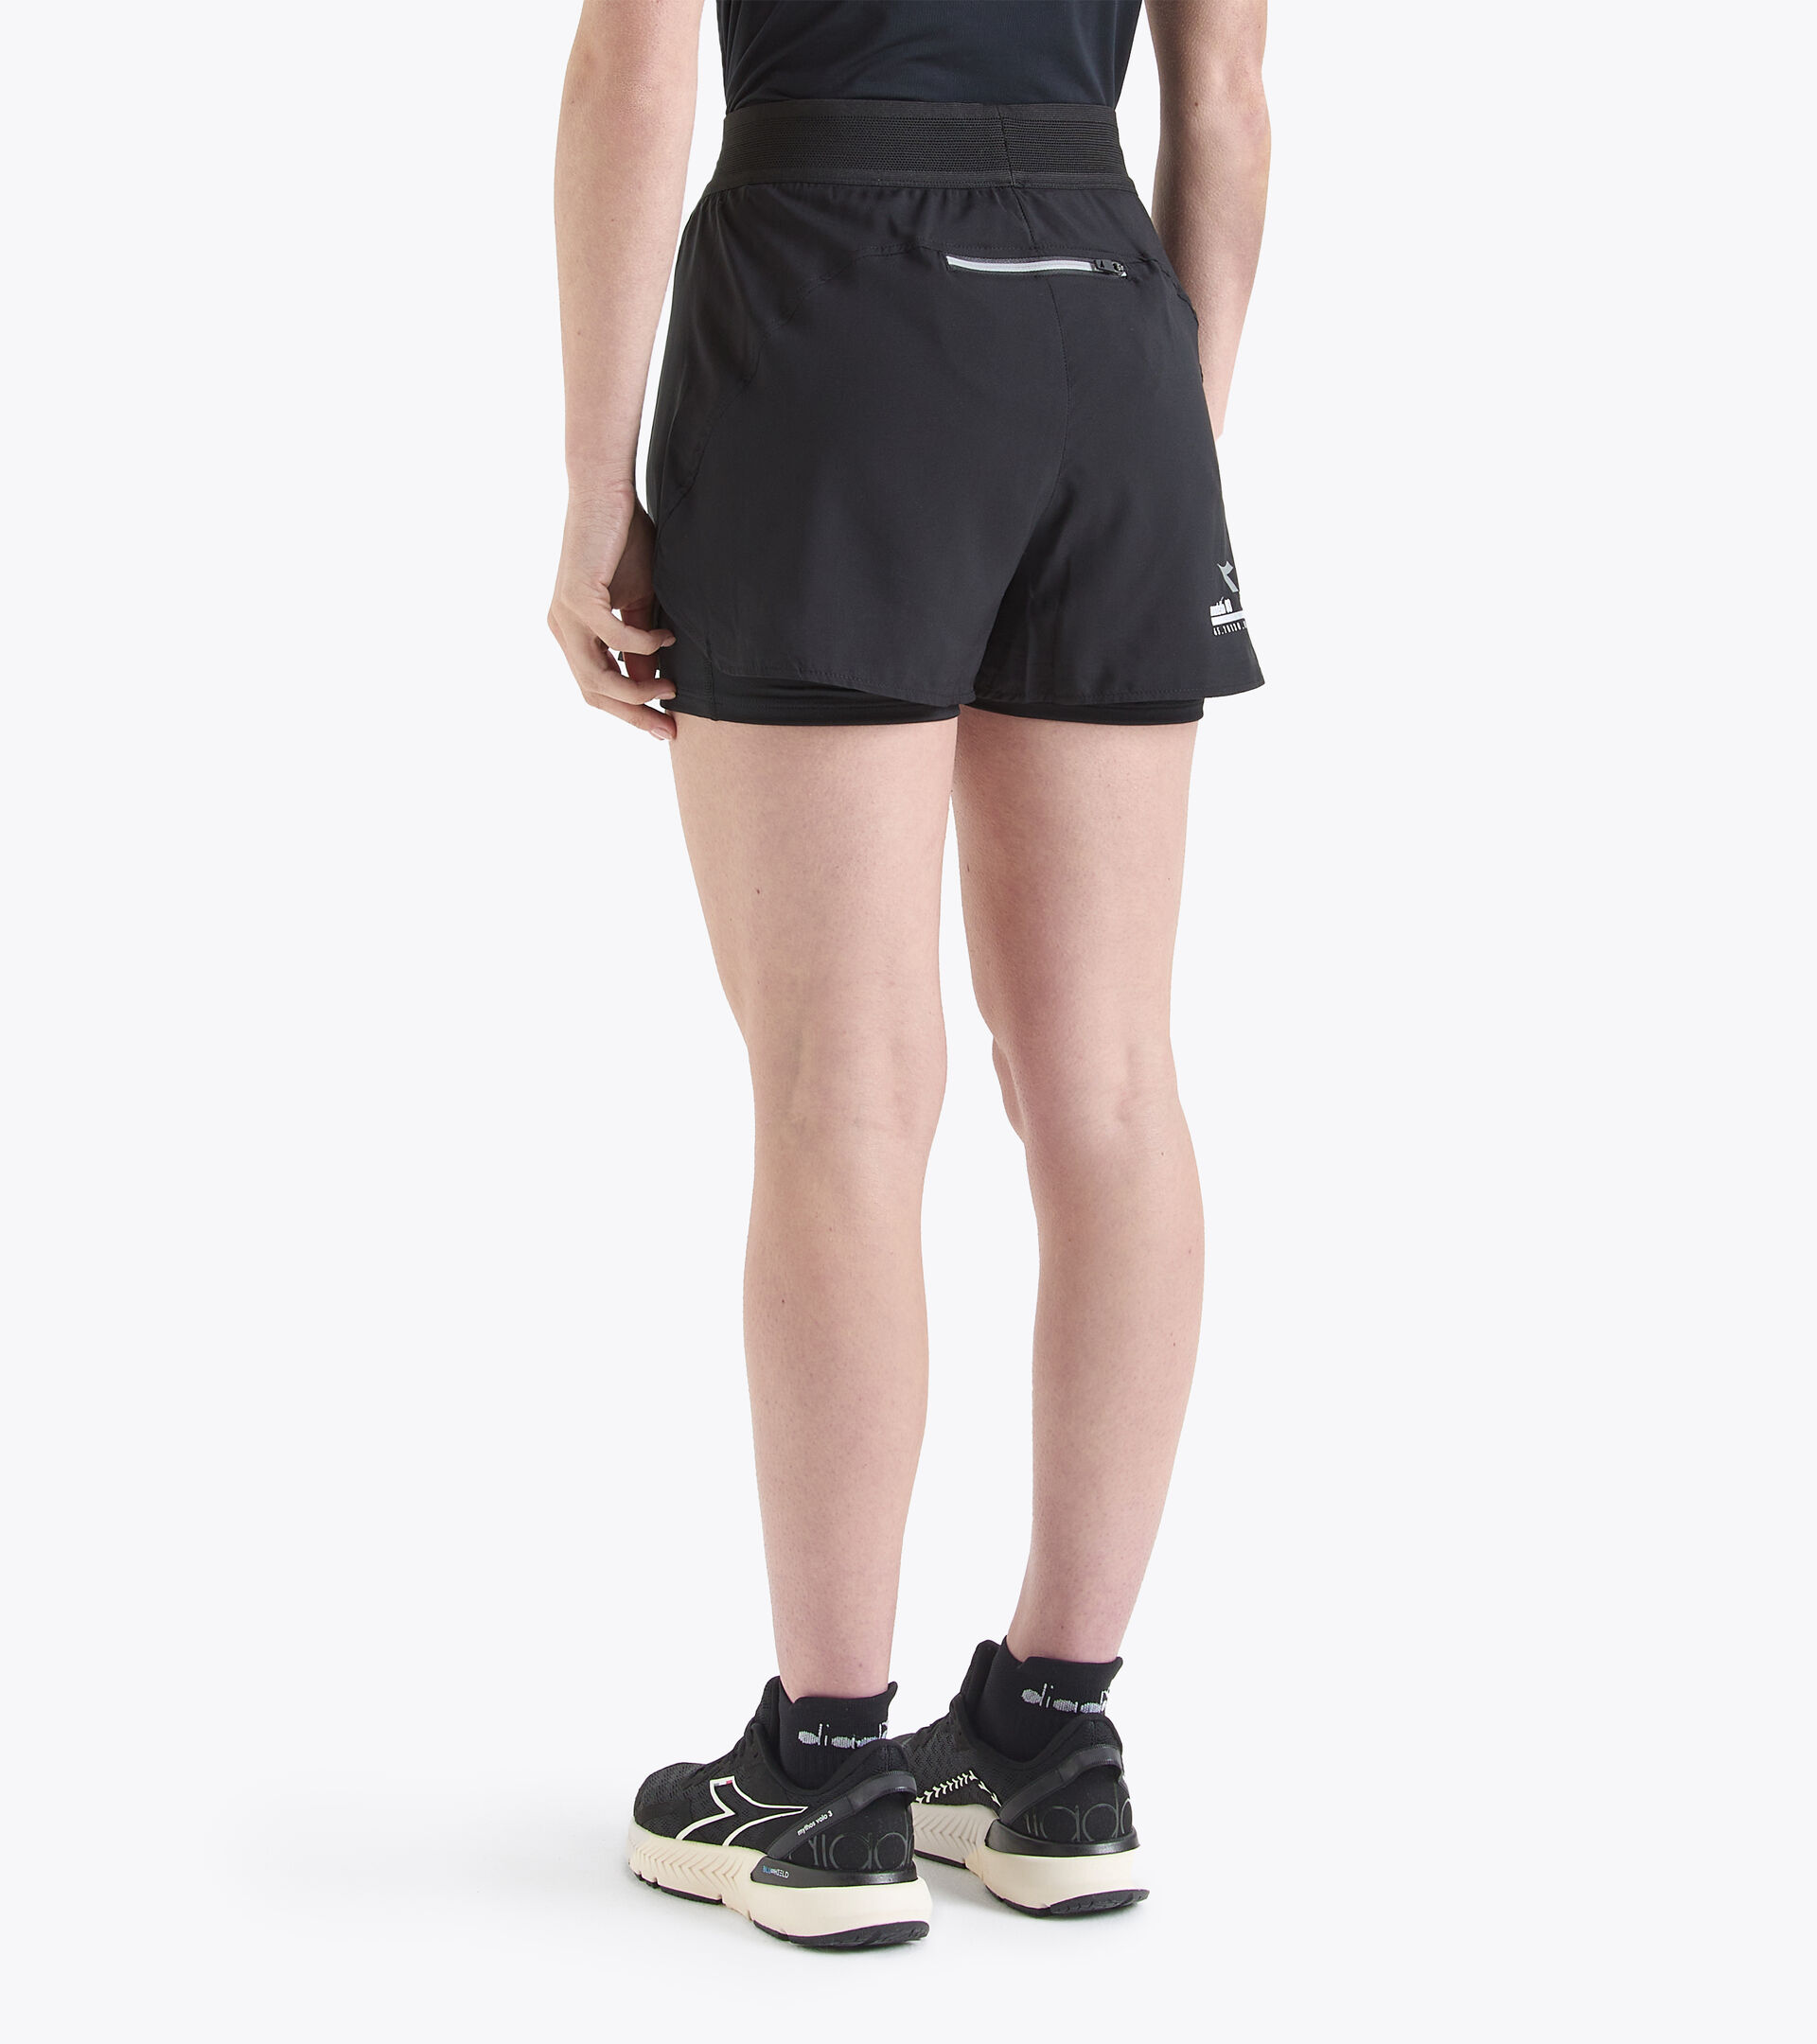 Women's Running Shorts, Double-Layered & Athletic